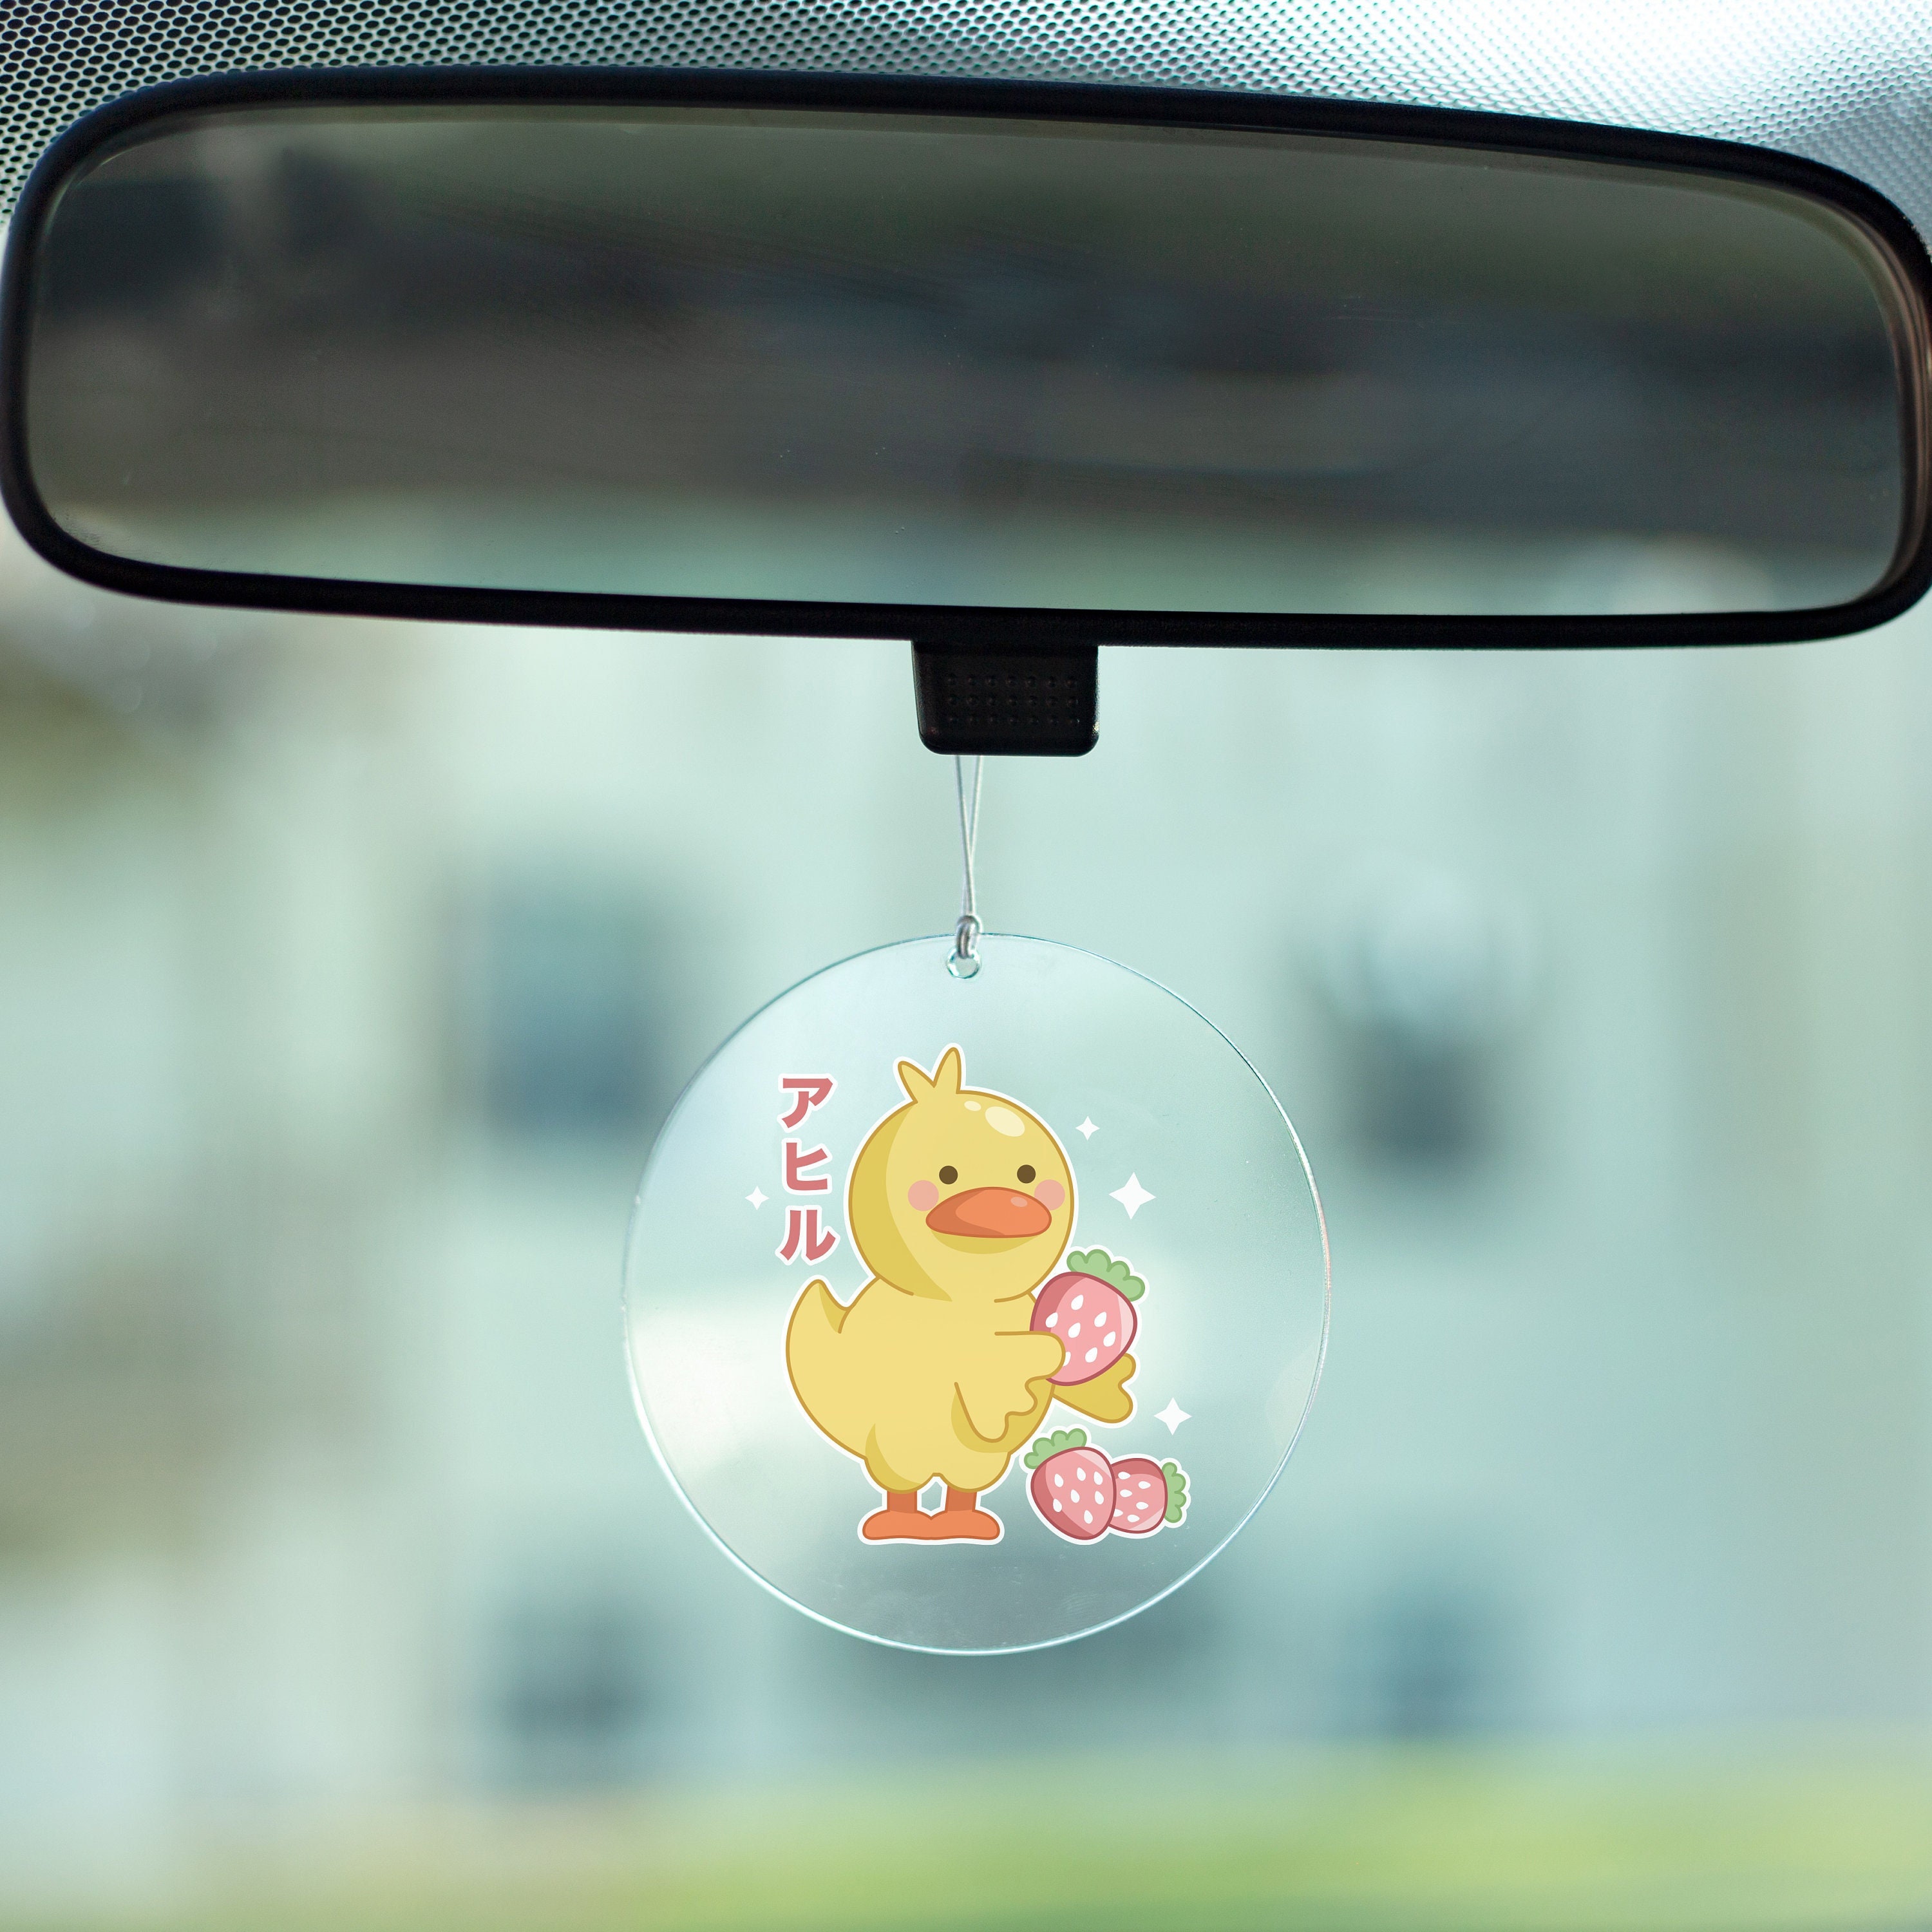  Cute Soot Sprites Car Rearview Mirror Accessories for